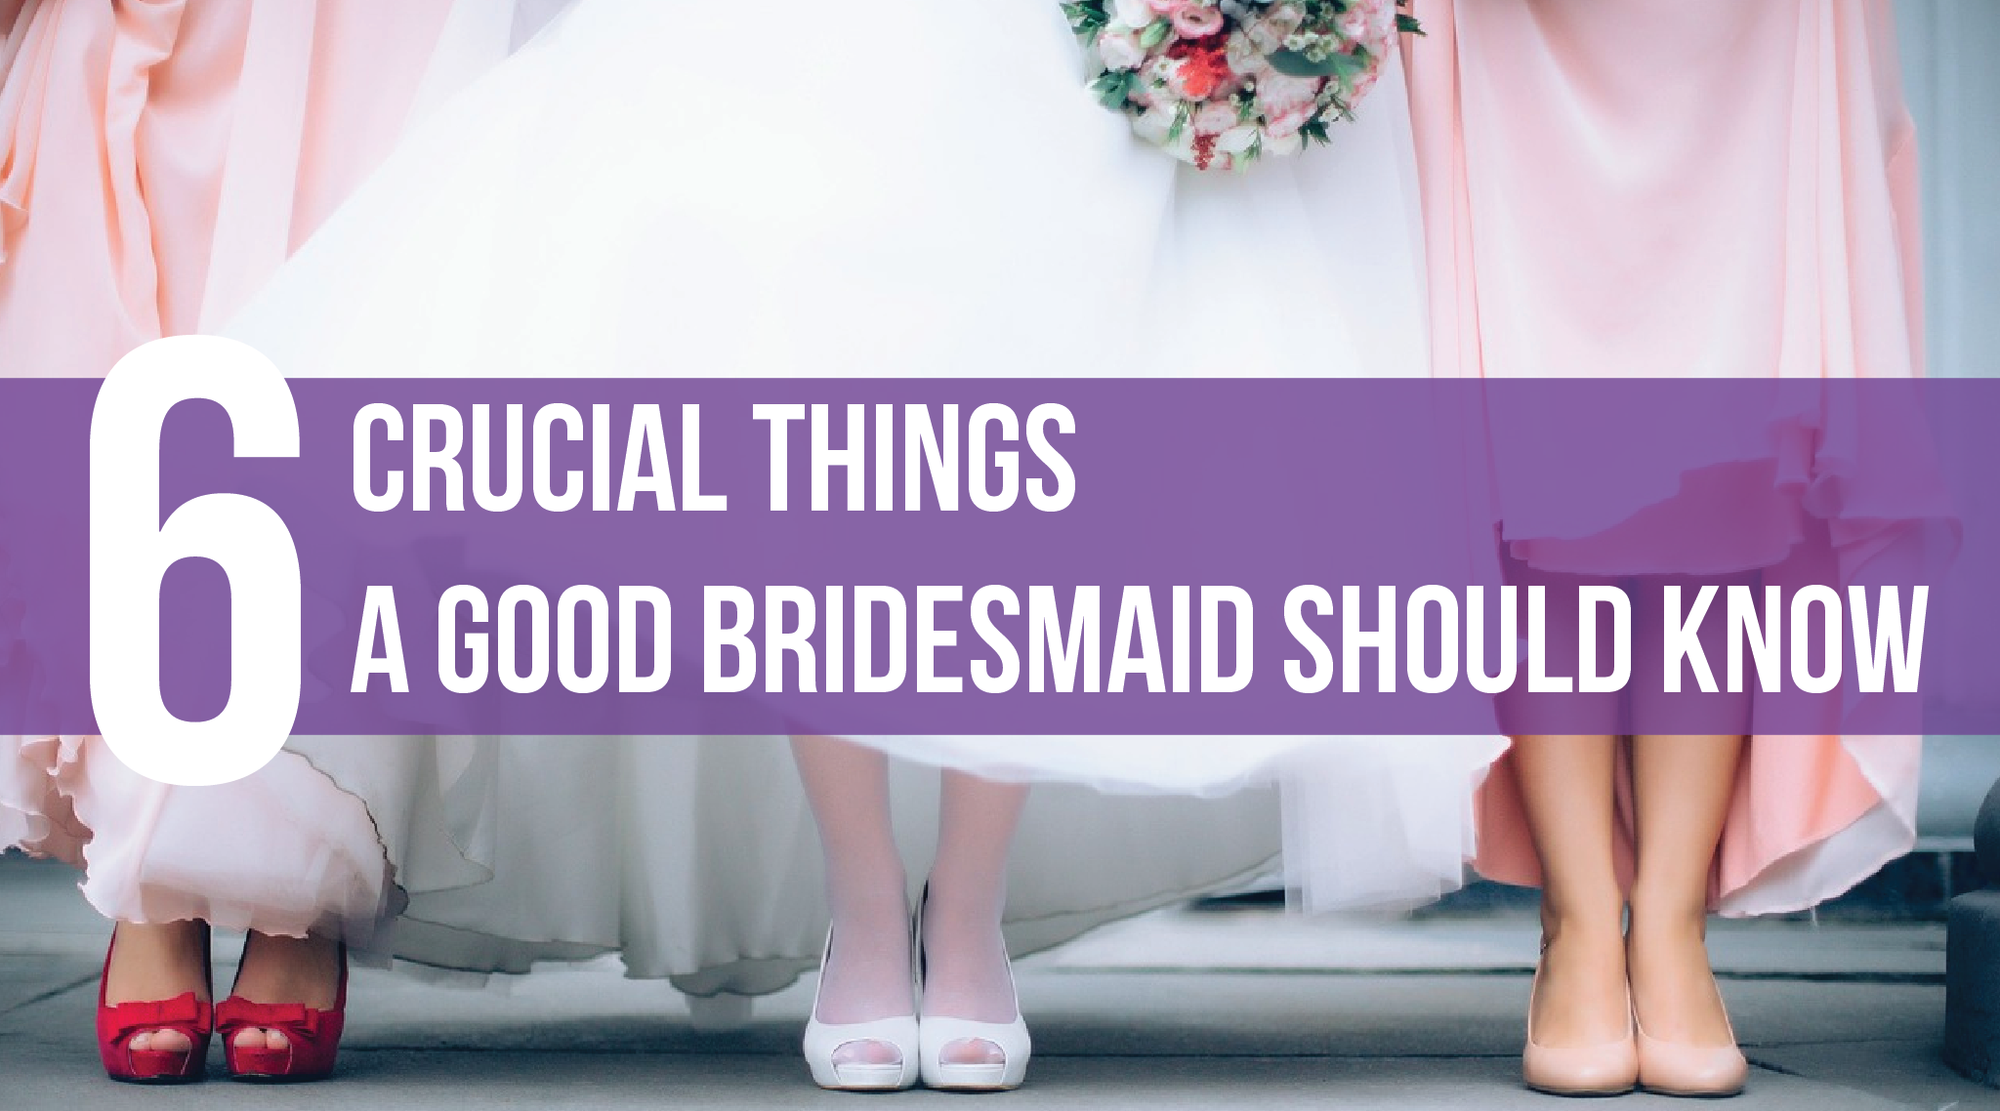 6 Crucial Things a Good Bridesmaid Should Know